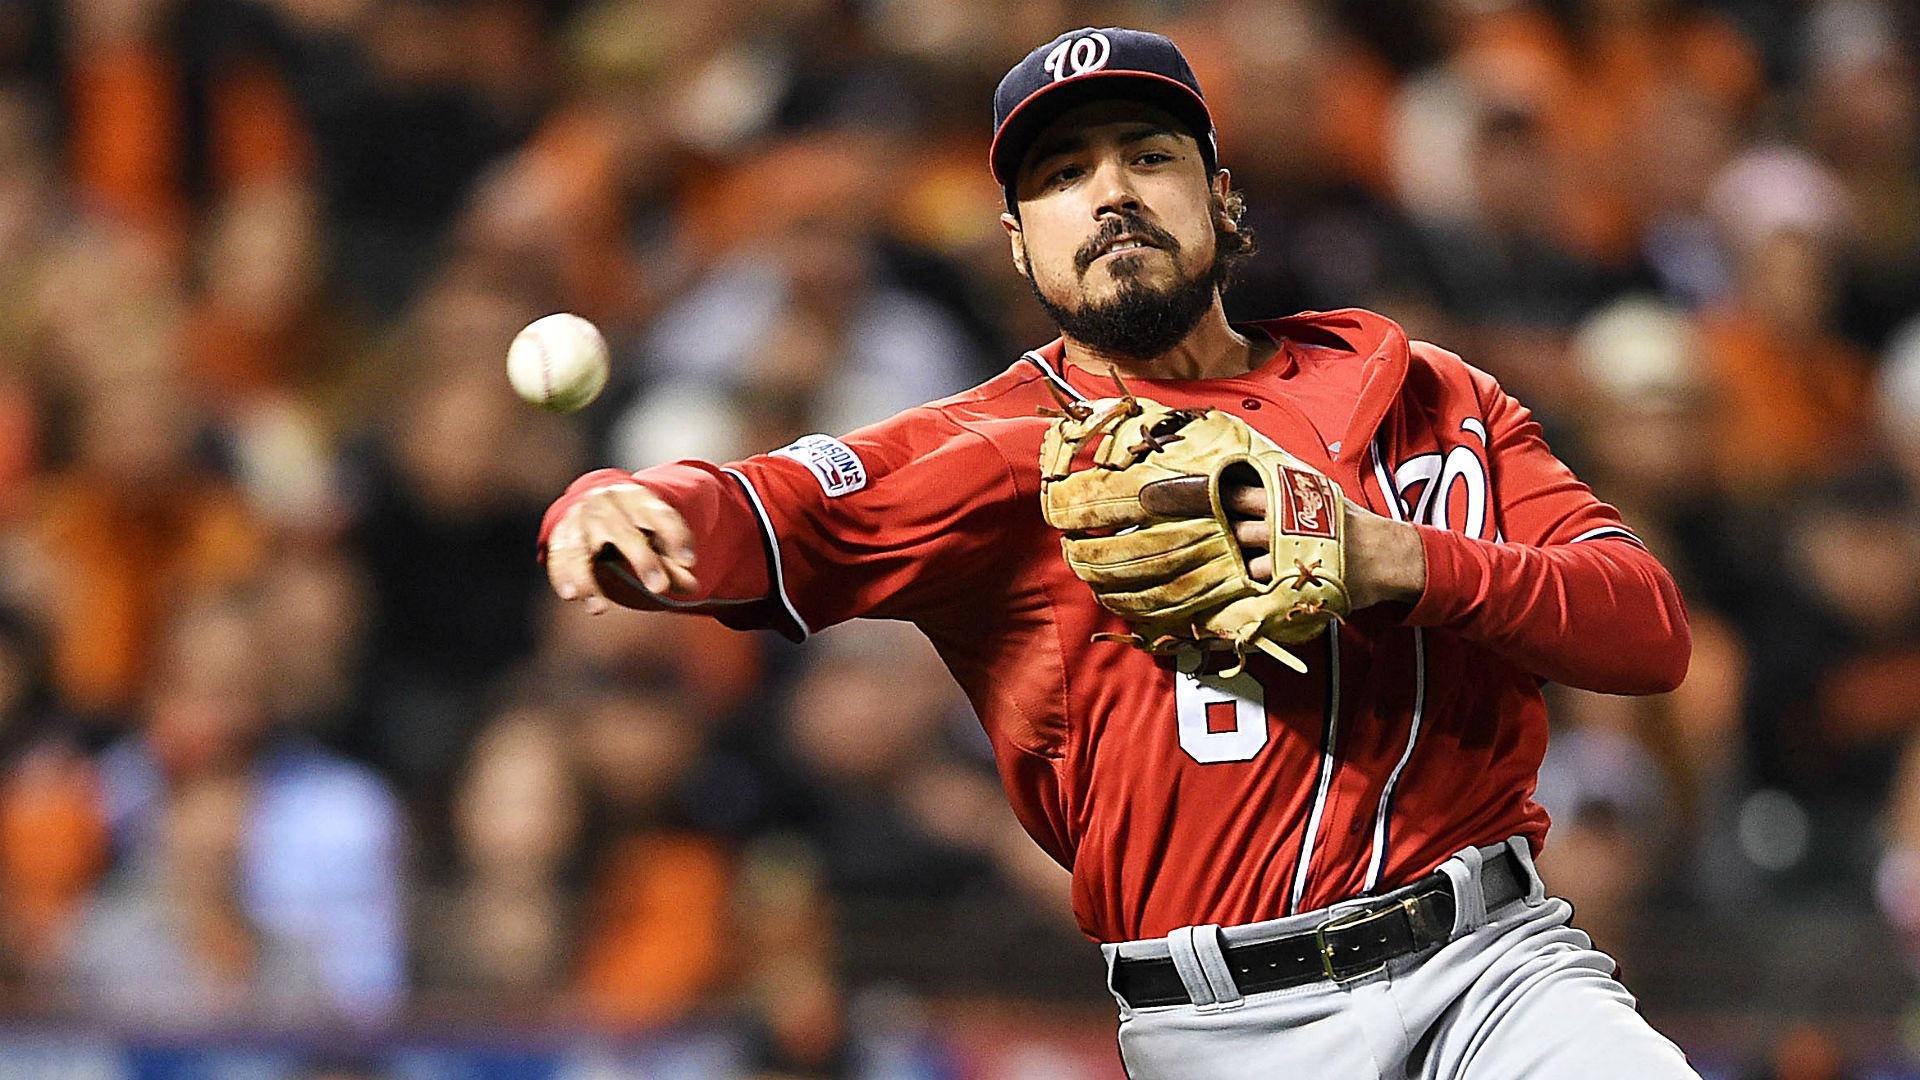 Anthony Rendon Throwing Ball In Red Uniform